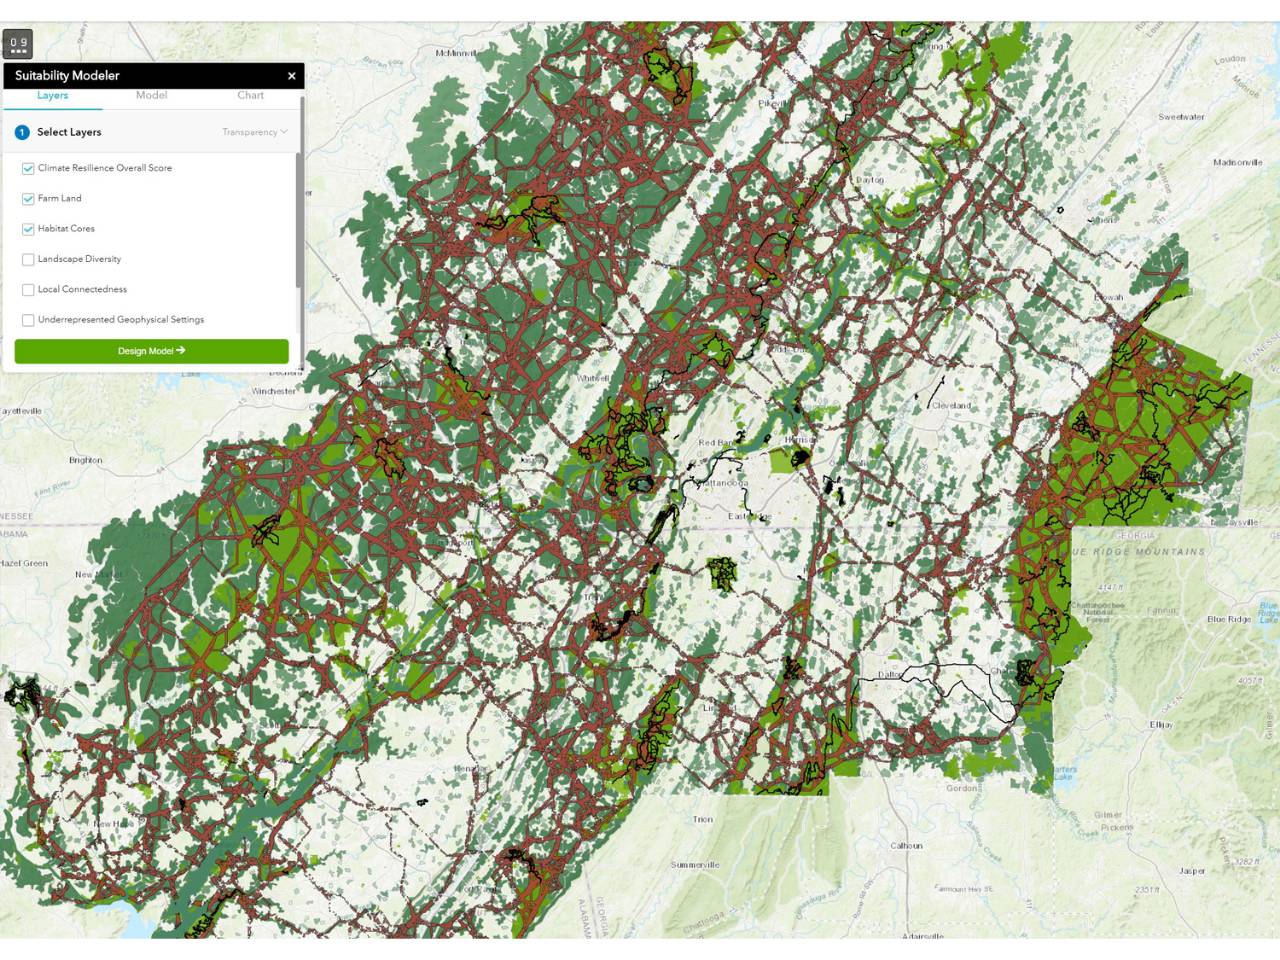 Conservation mapping tool